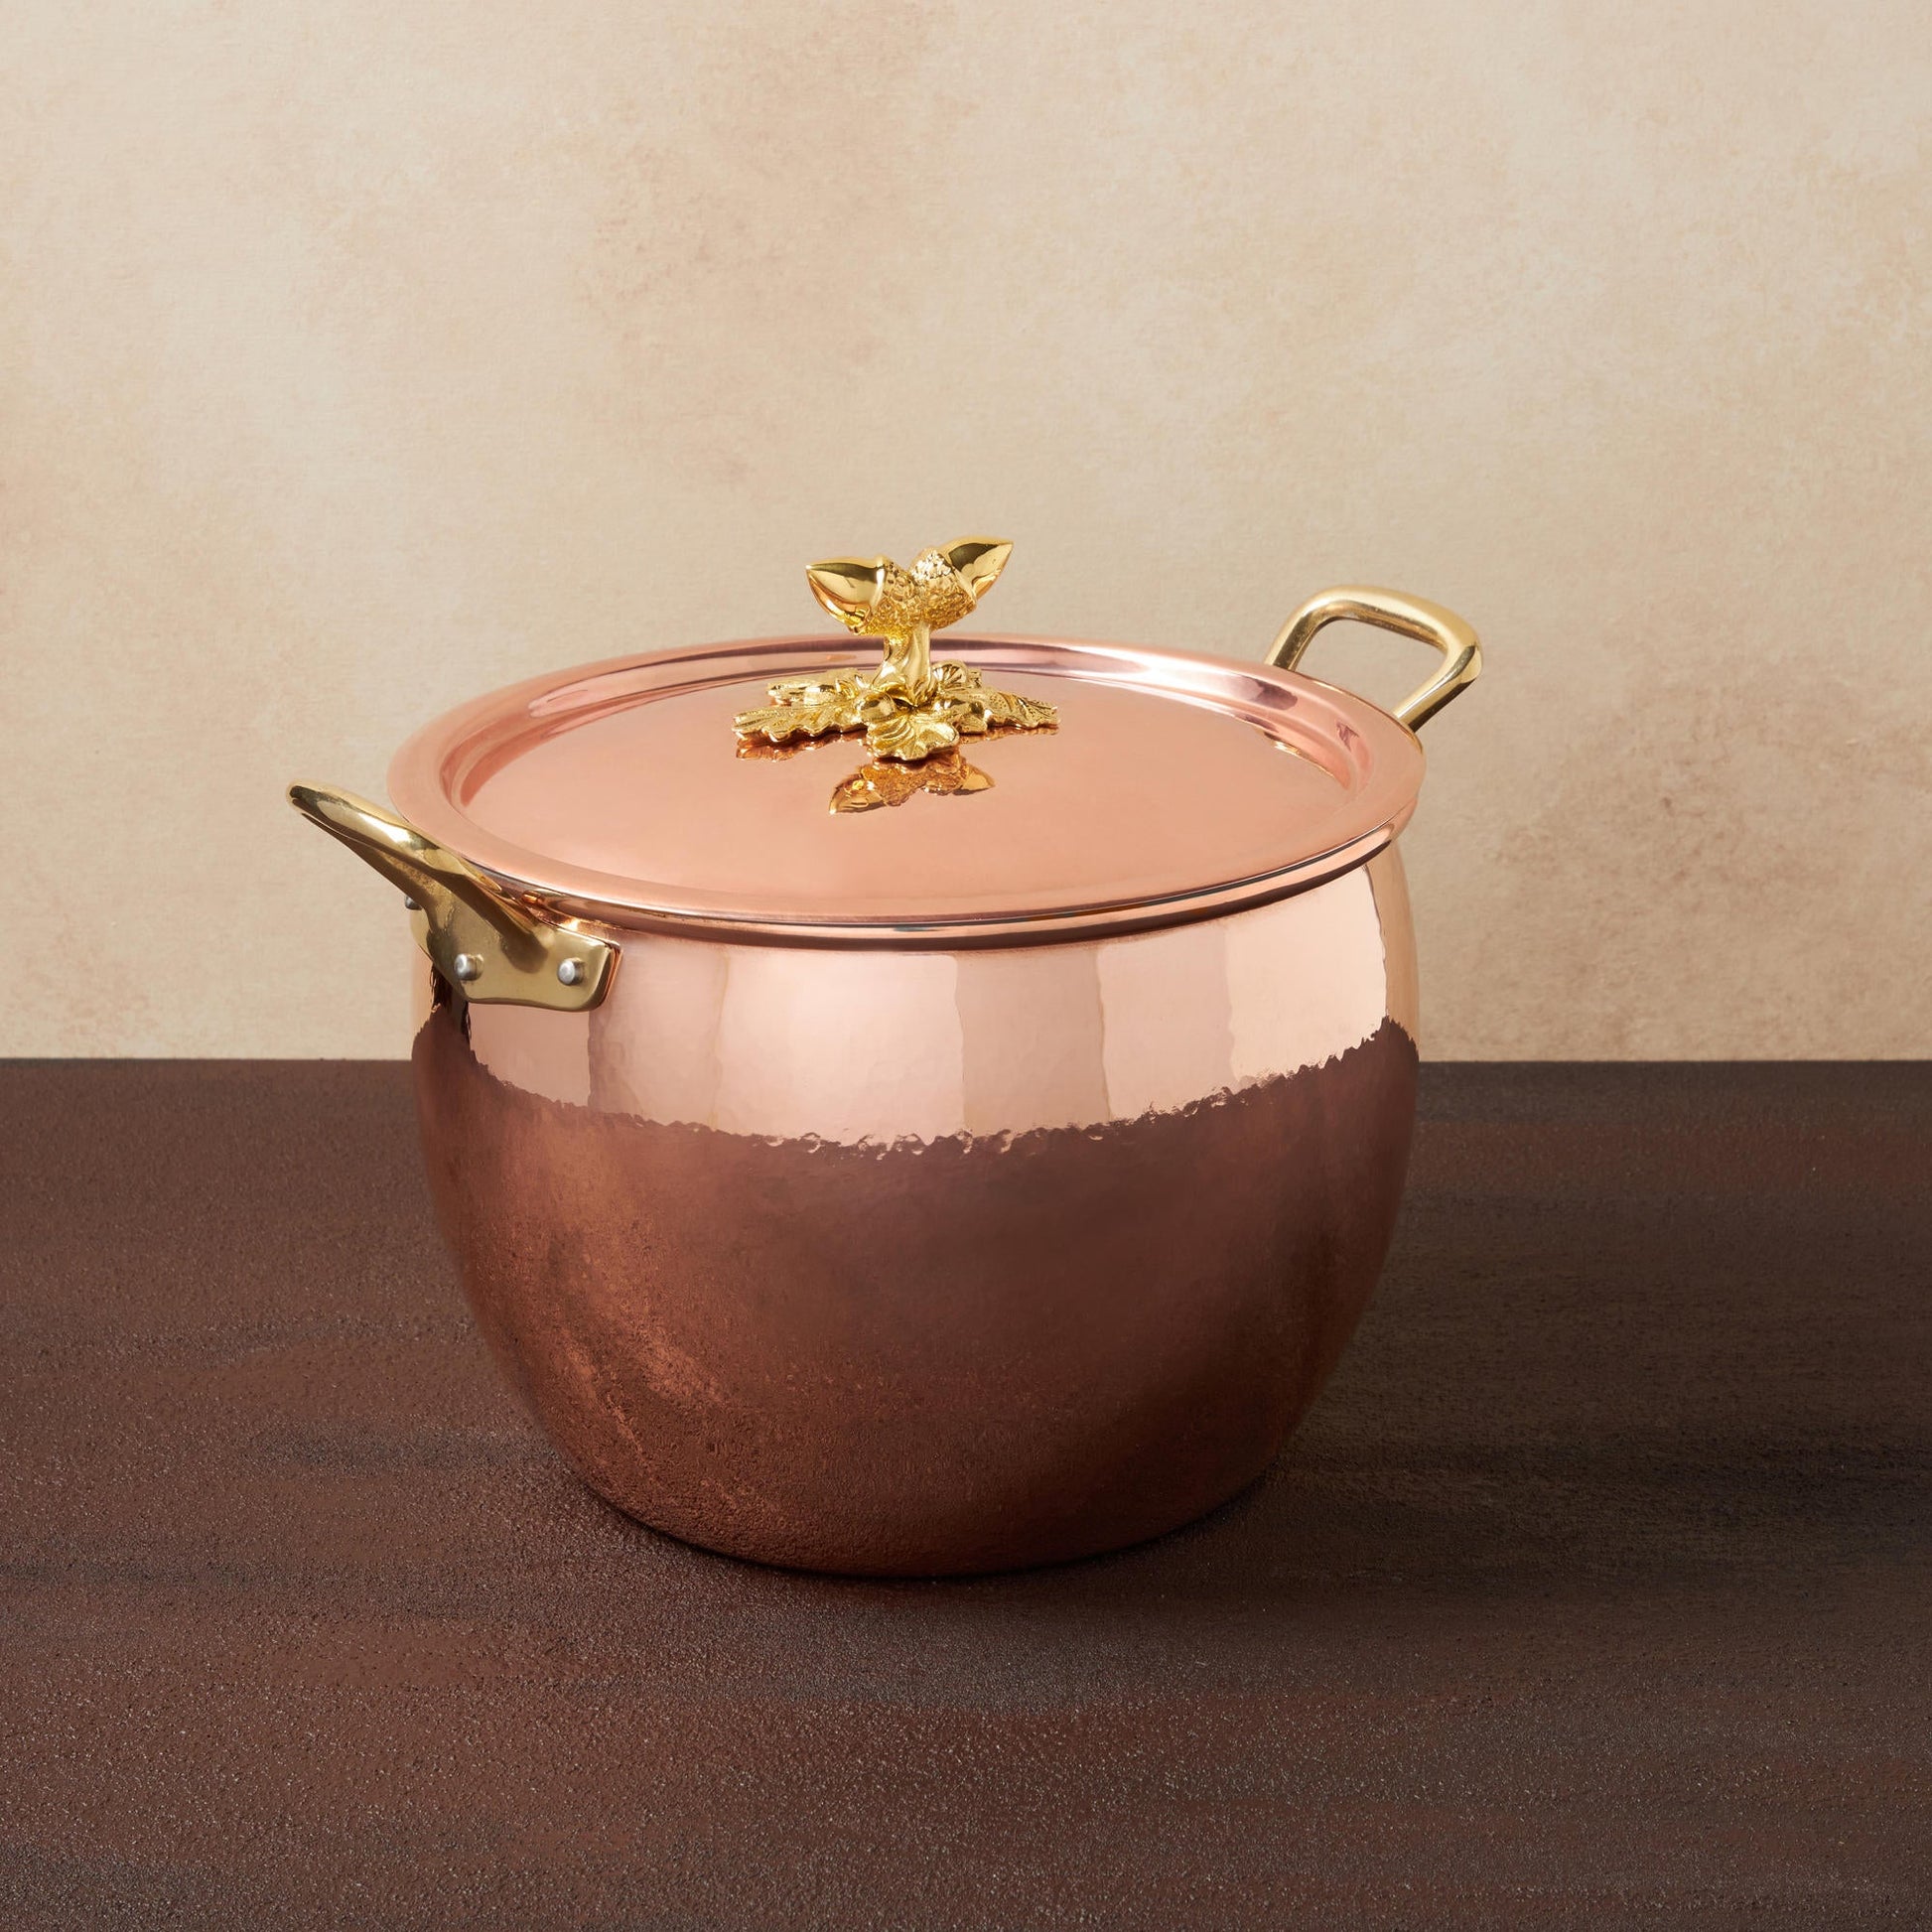 Hammered copper 7.5 Qt Stockpot  lined with high purity tin applied by hand over fire and bronze handles, from Ruffoni Historia collection